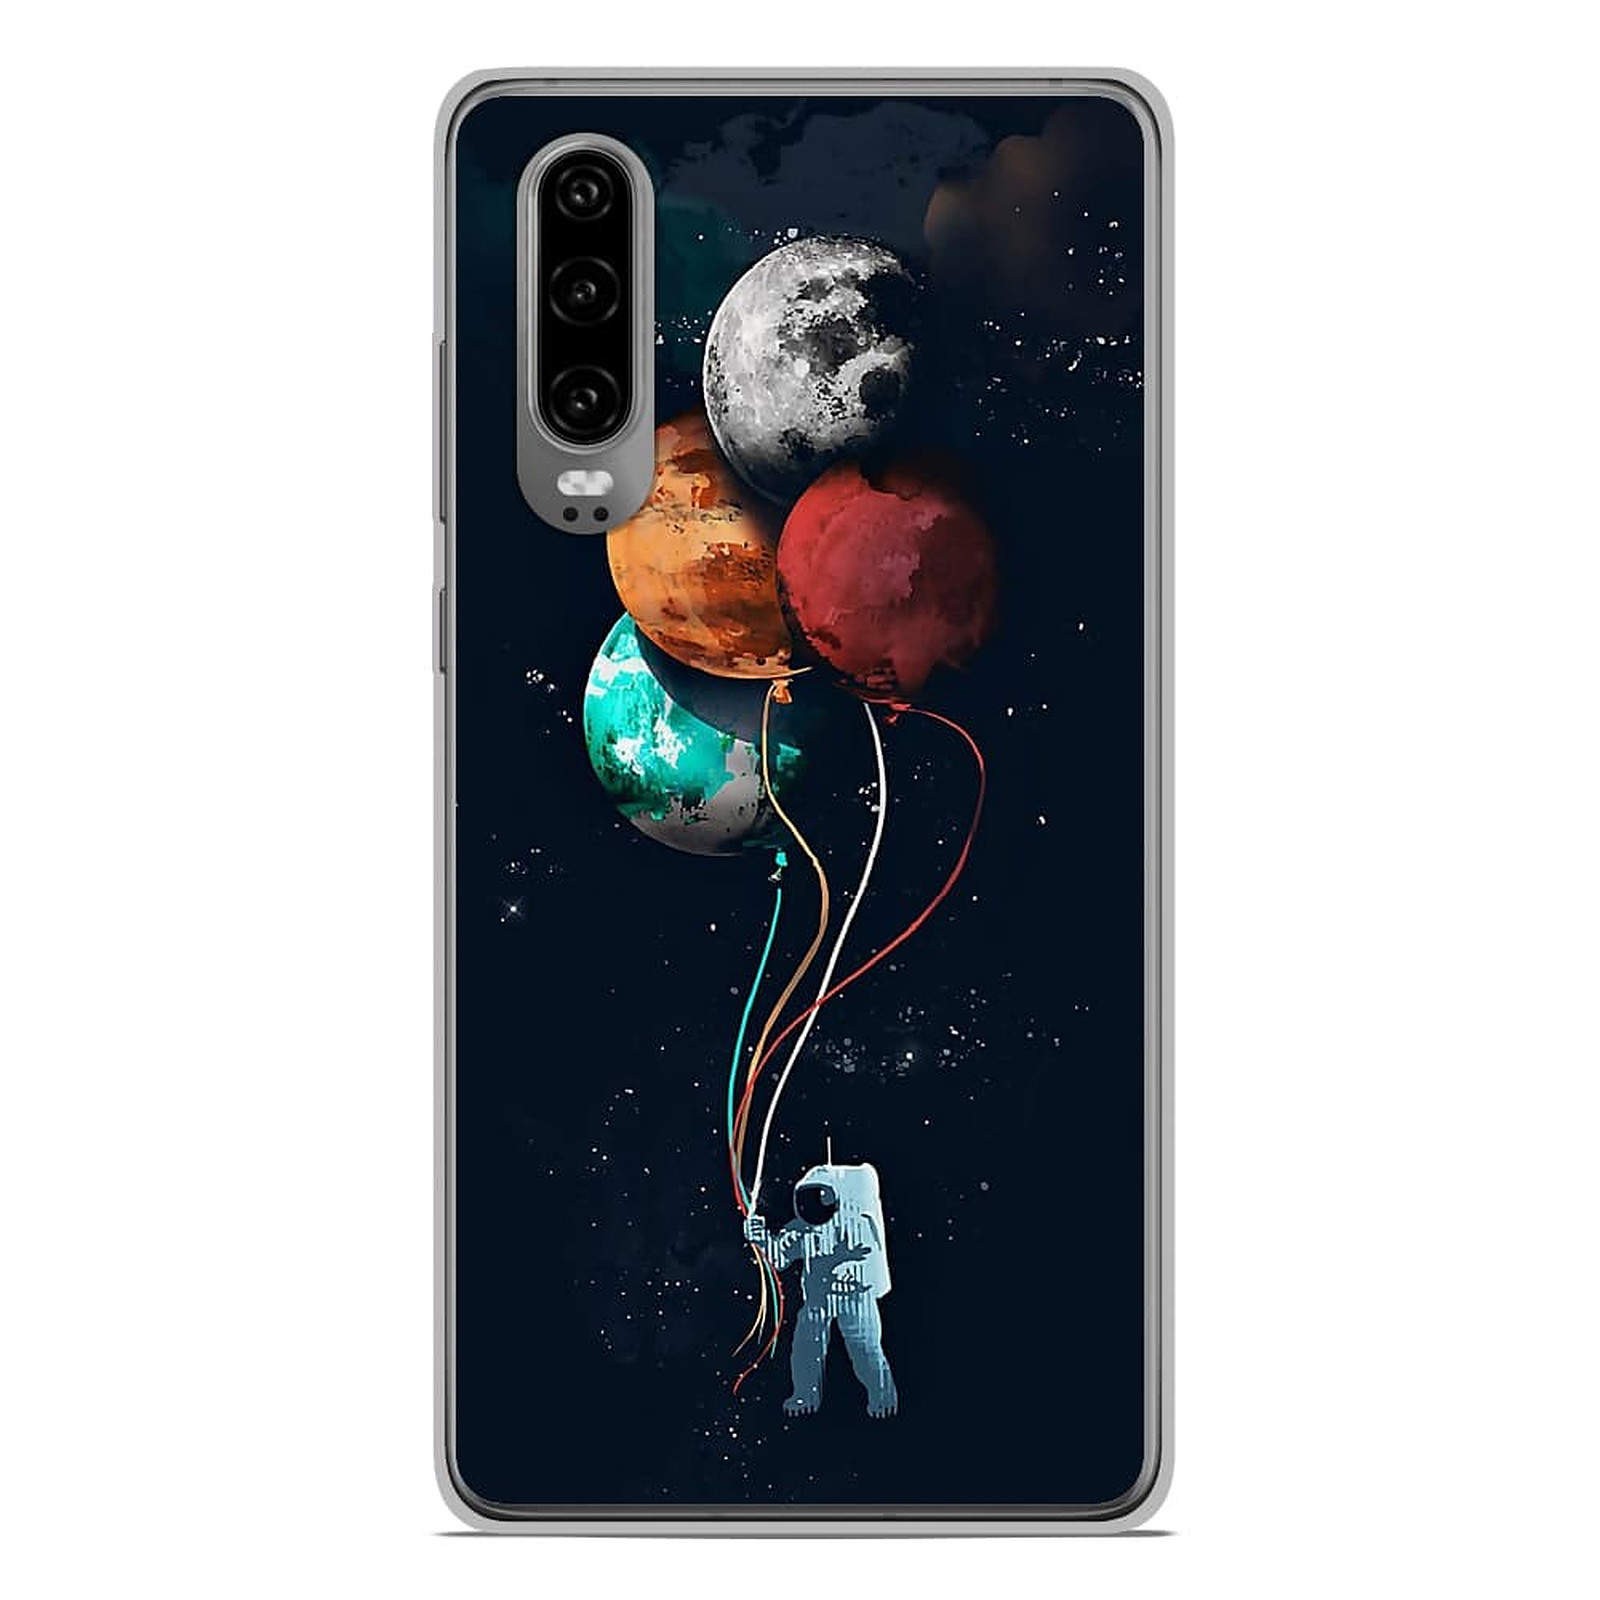 1001 Coques Coque silicone gel Huawei P30 motif Cosmonaute aux Ballons - Coque telephone 1001Coques